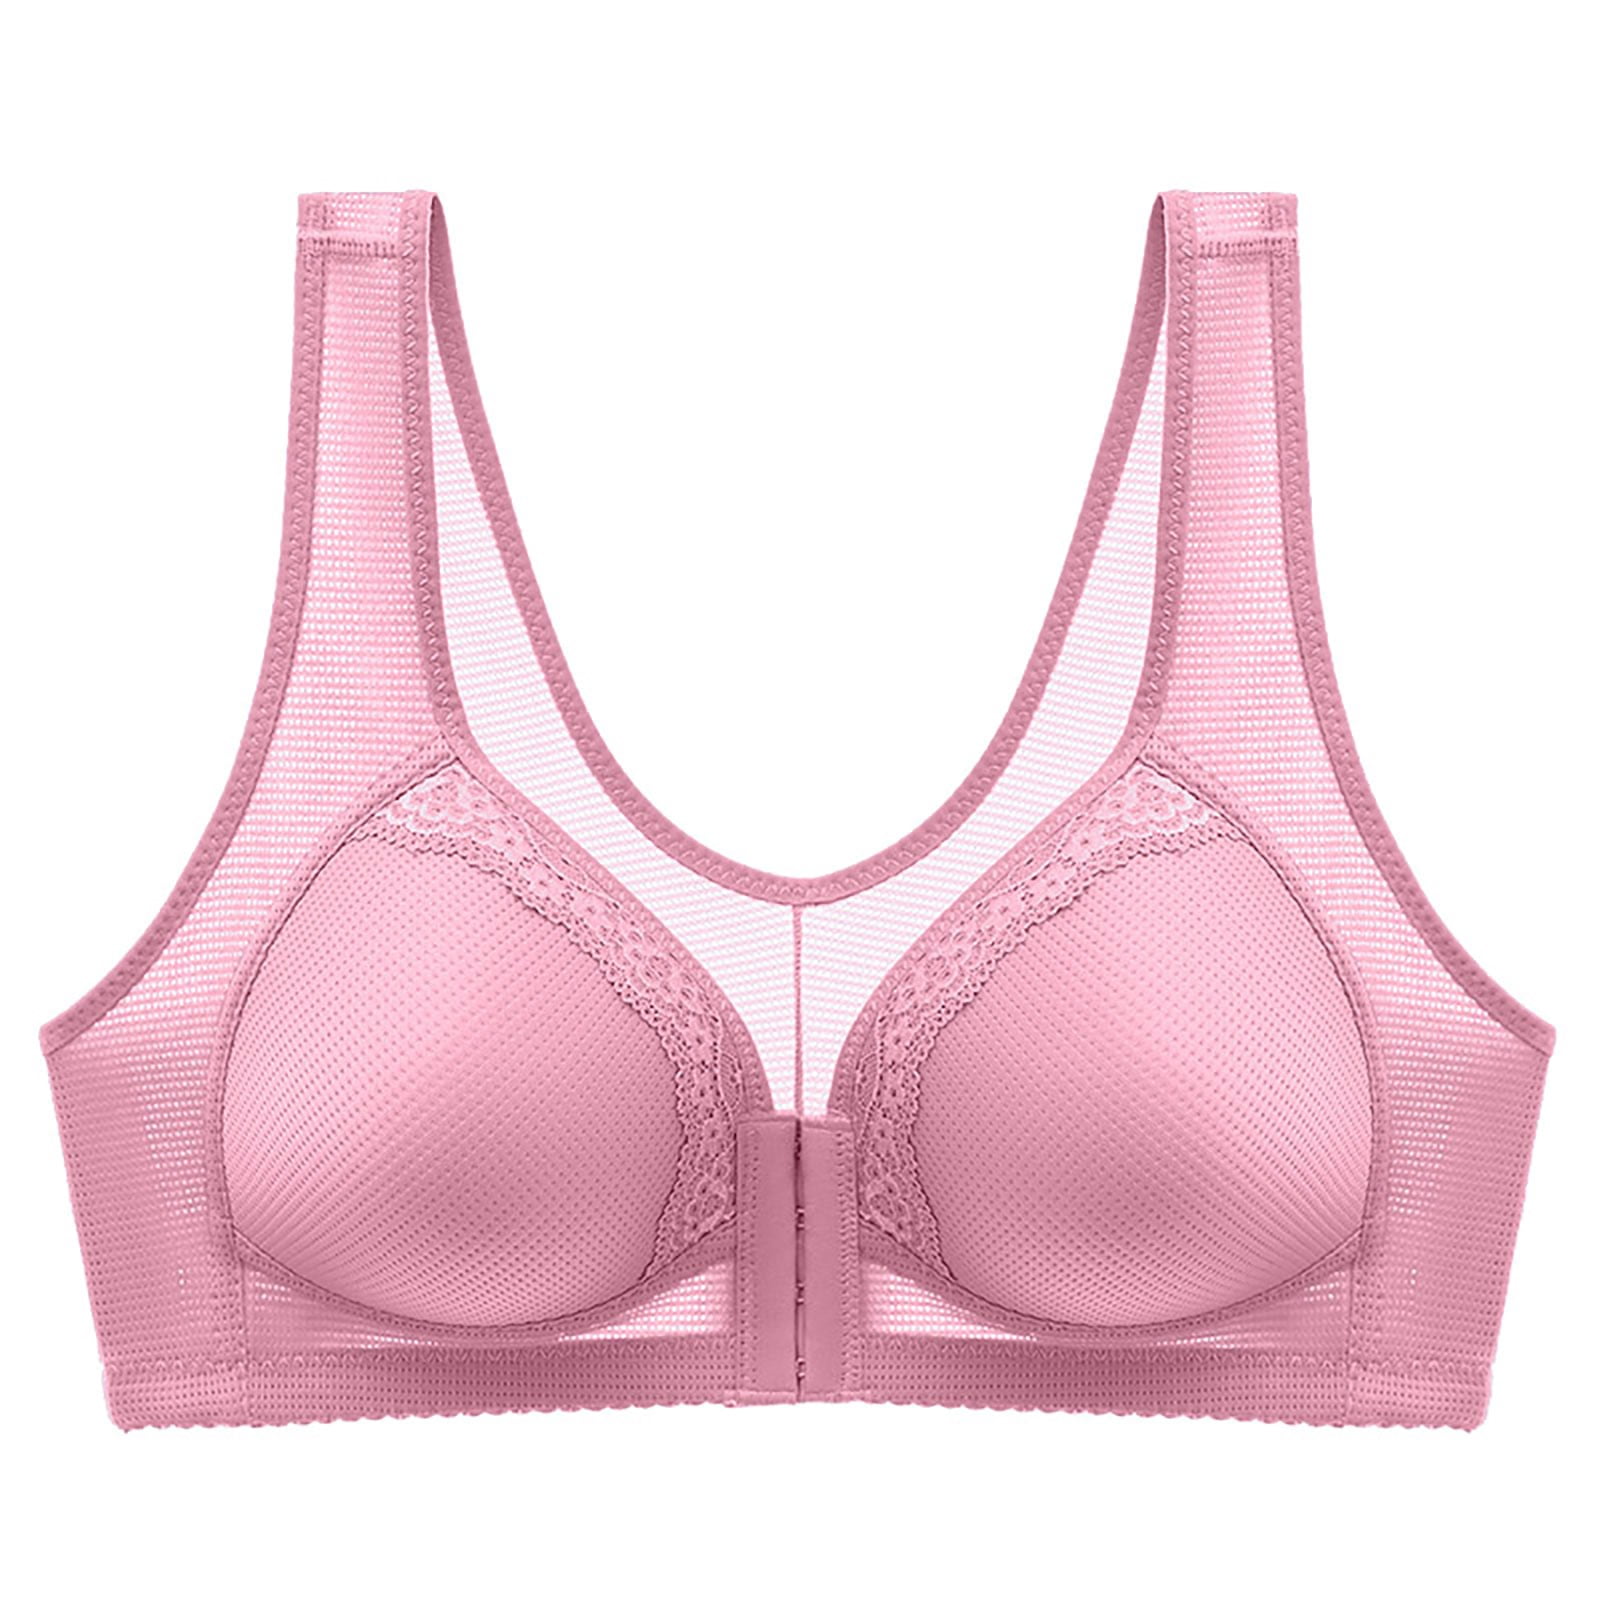 TOWED22 Plus Size Bras,Women's Lace Plus Size Full Coverage Unlined Underwire  Bra Hot Pink,36 